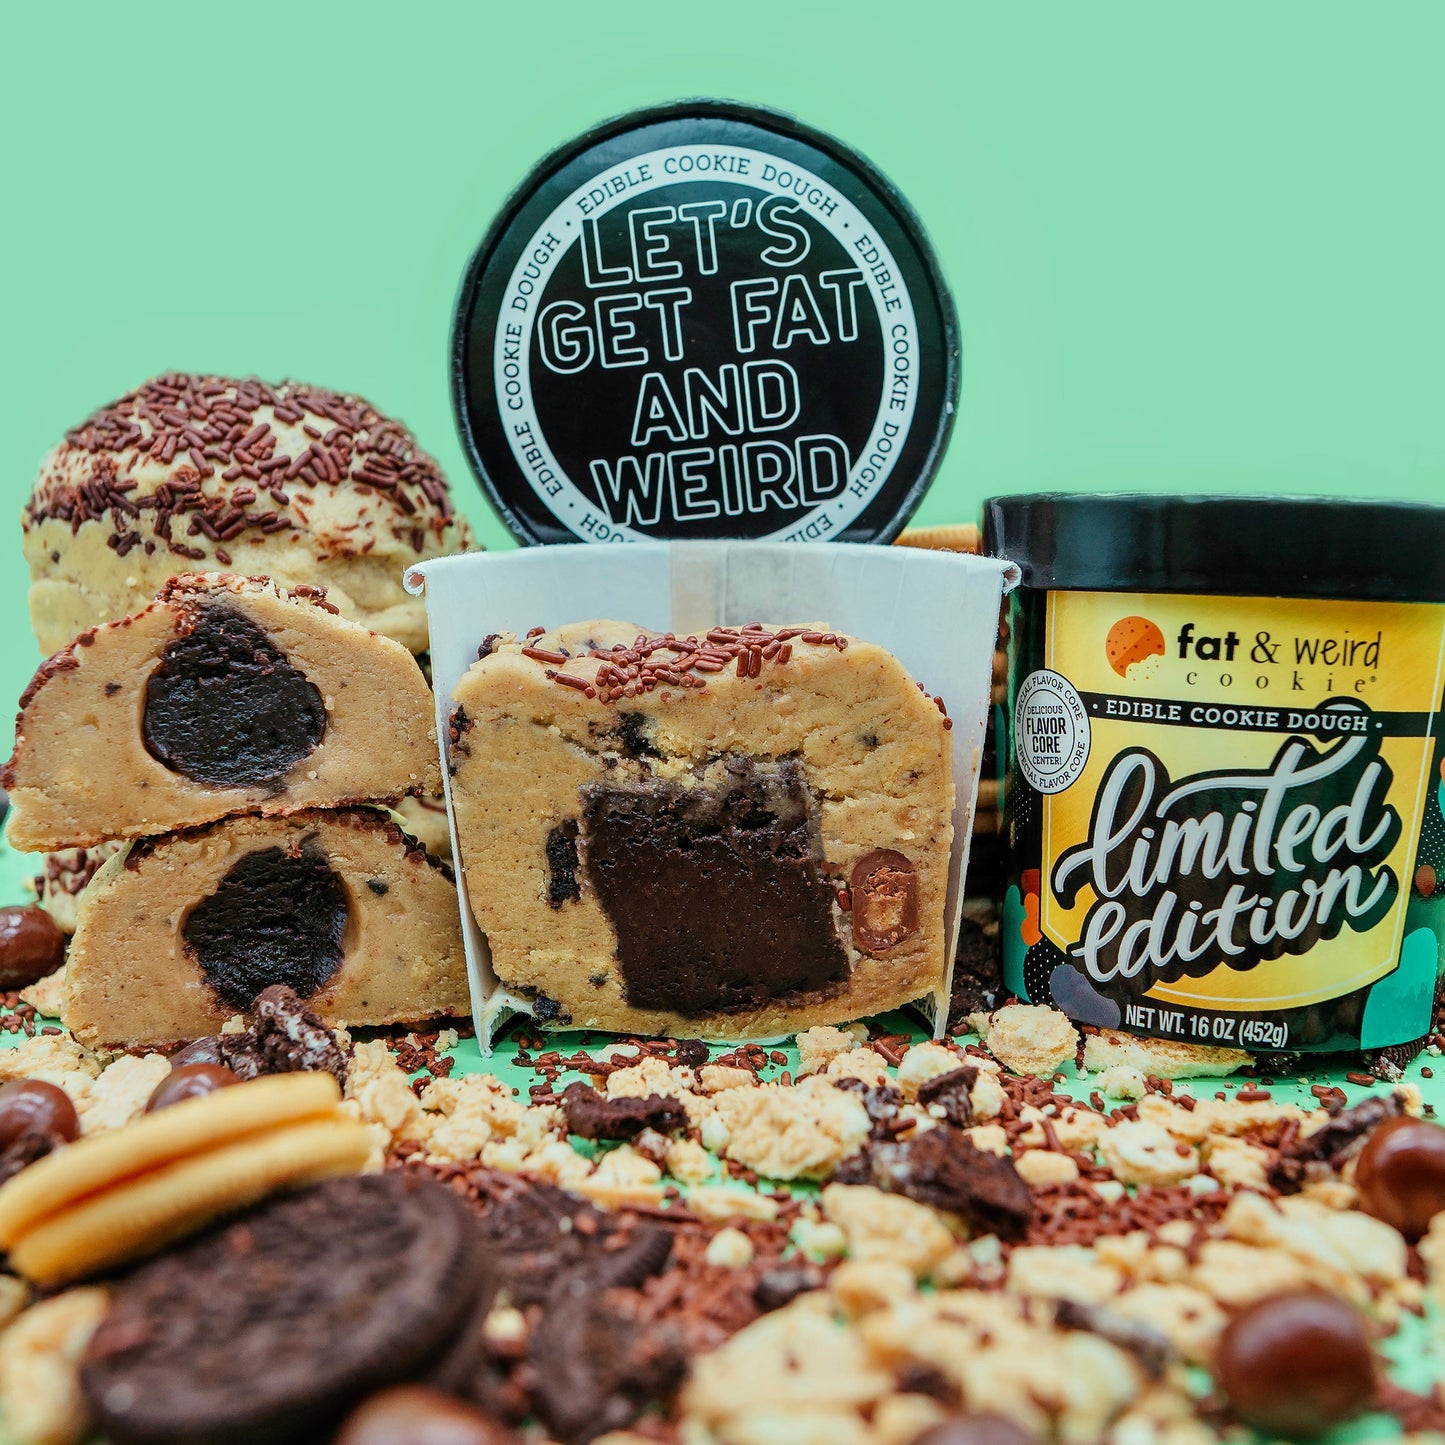 Limited Edition Edible Cookie Dough - BBW Cookie Dough Fat & Weird Cookie 